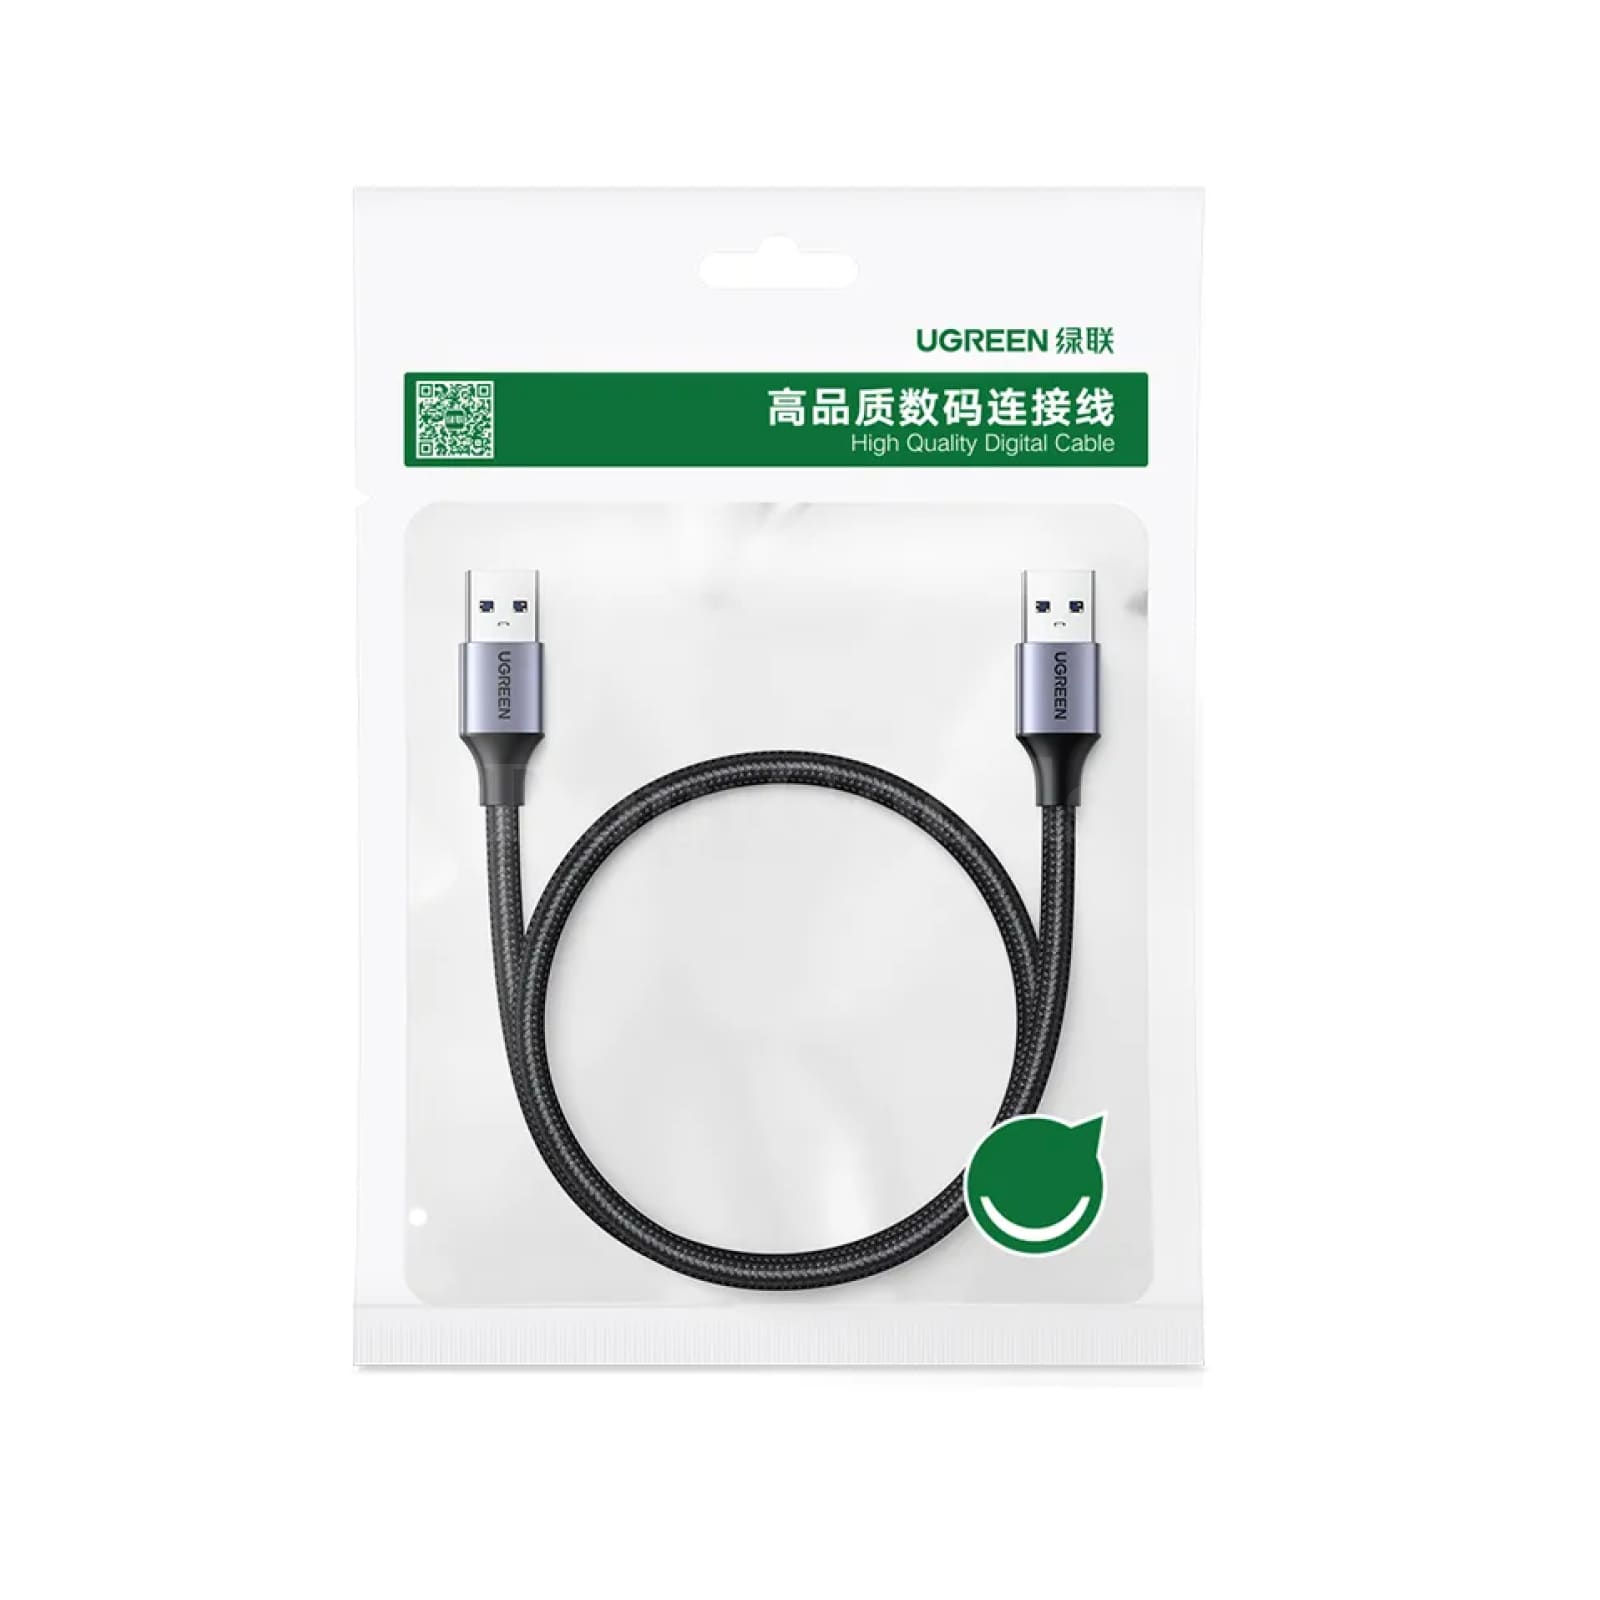 Ugreen Usb To Extension Cable - Type A Male 3.0/2.0 Extender 301635